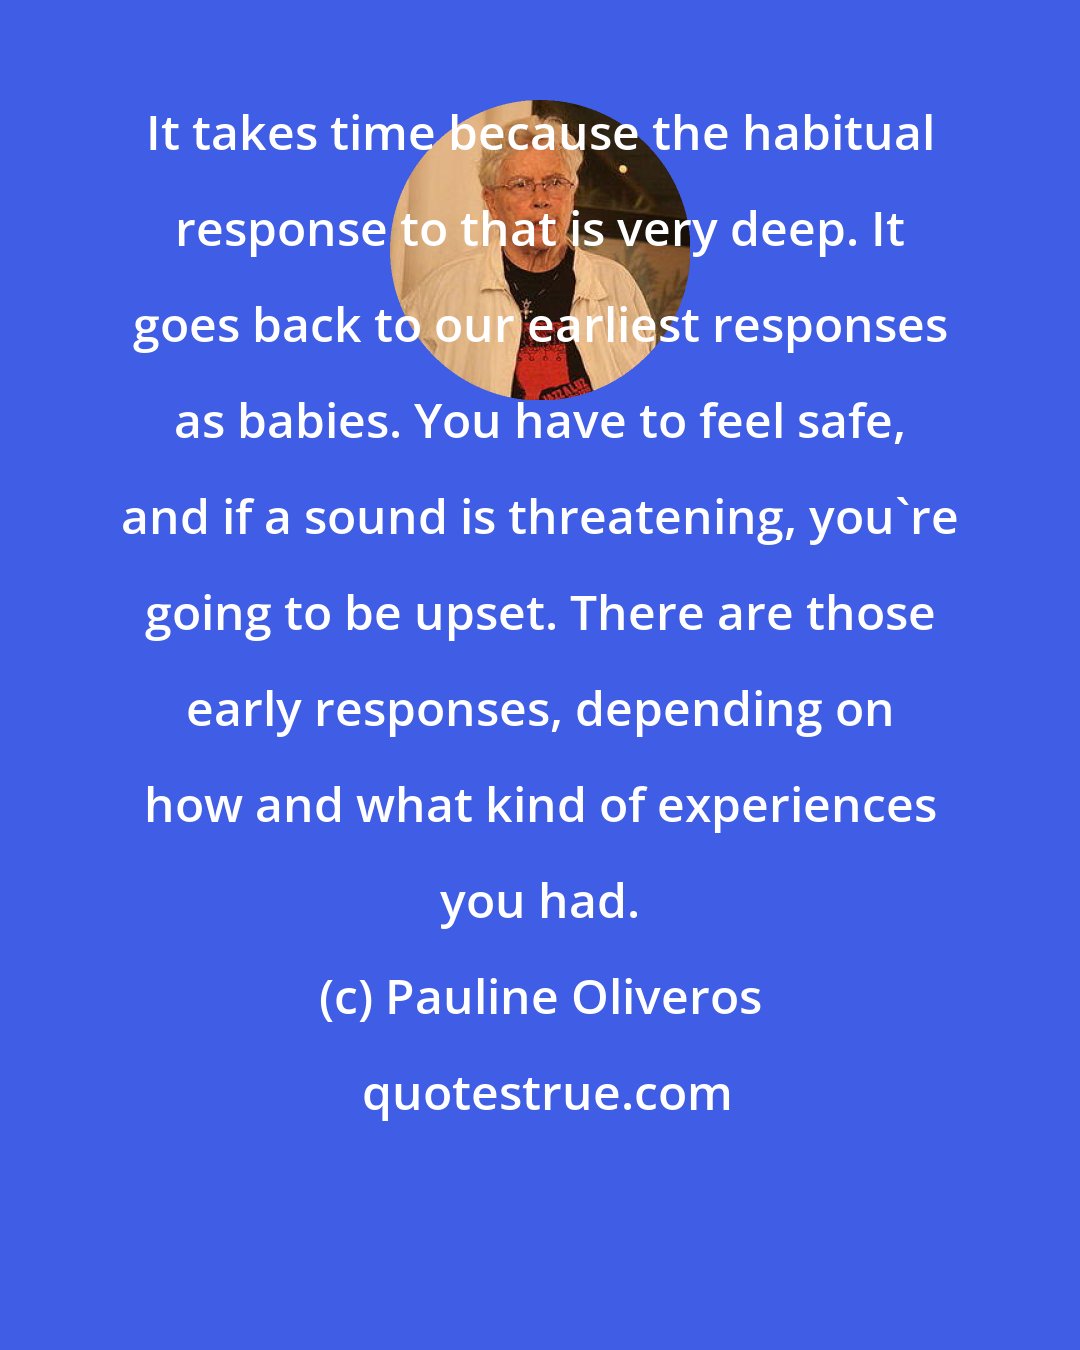 Pauline Oliveros: It takes time because the habitual response to that is very deep. It goes back to our earliest responses as babies. You have to feel safe, and if a sound is threatening, you're going to be upset. There are those early responses, depending on how and what kind of experiences you had.